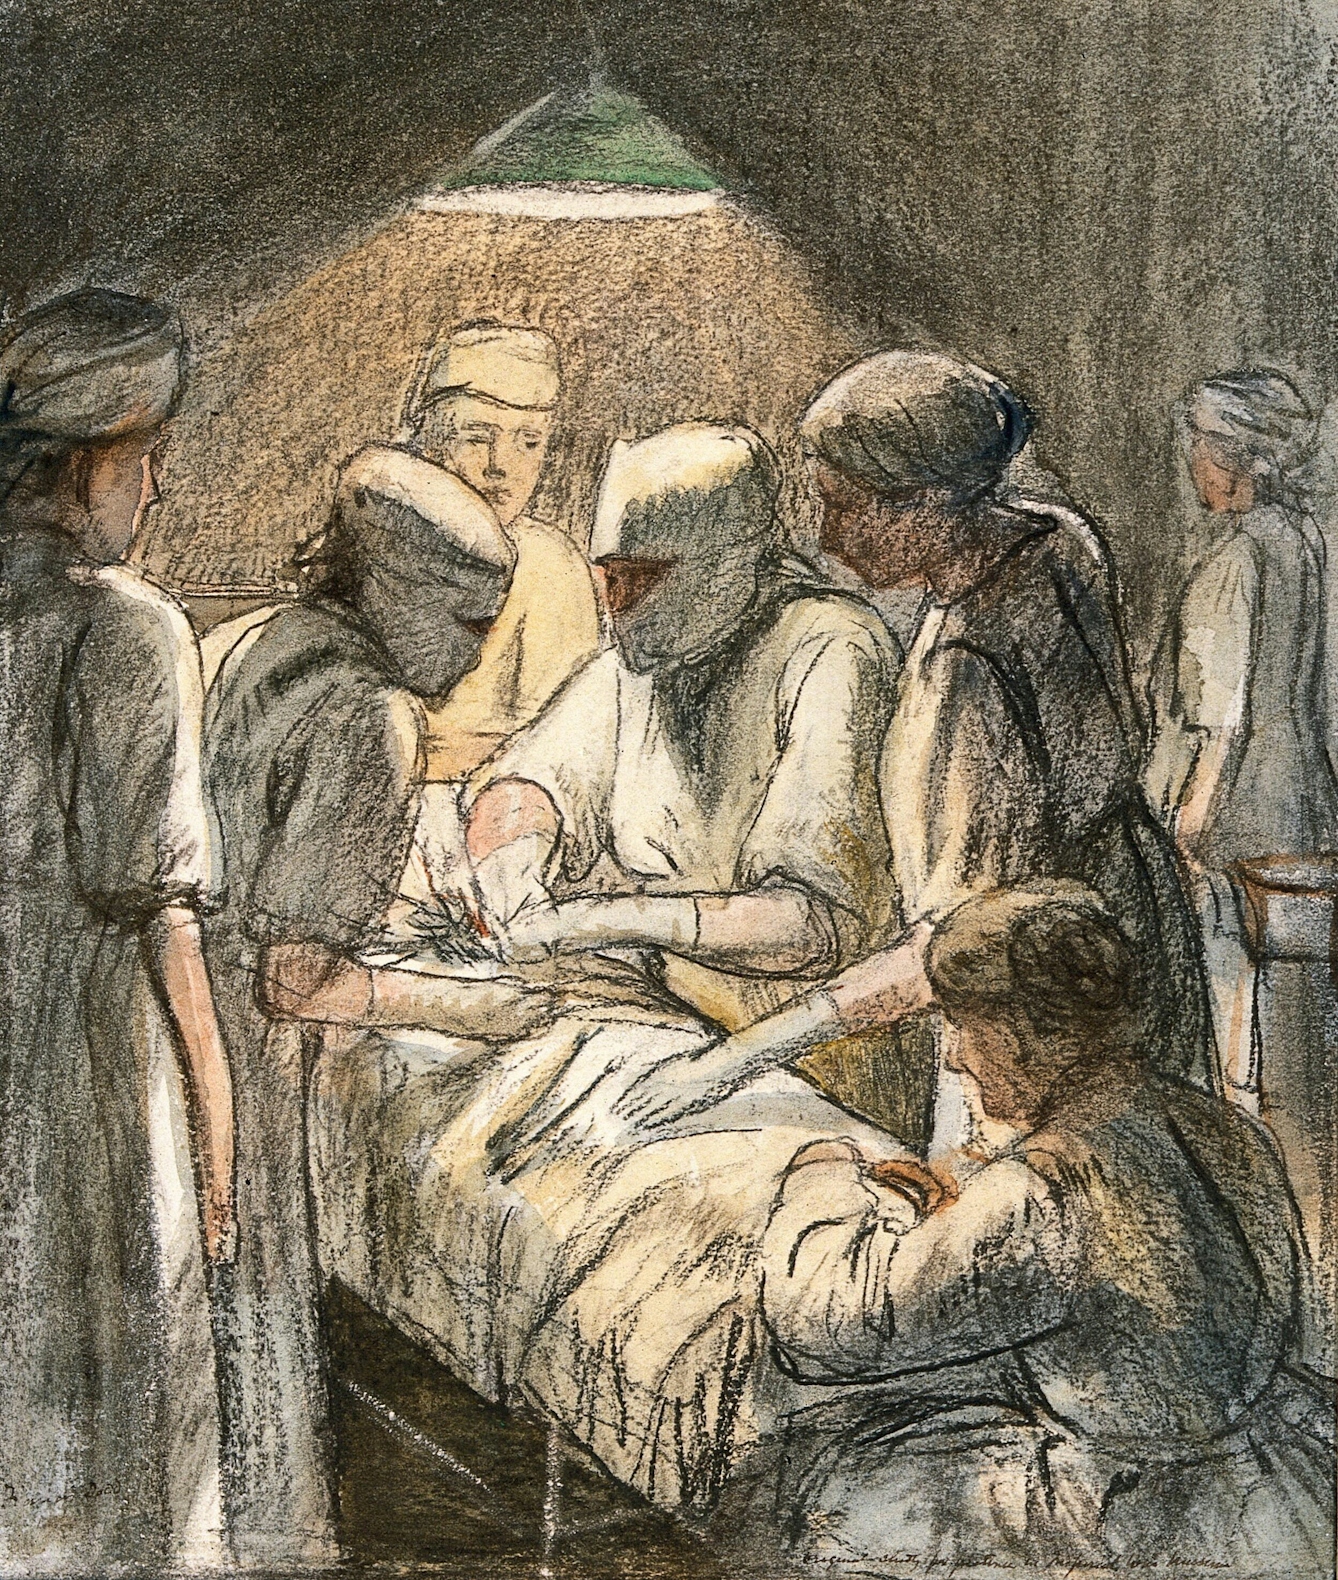 Coloured chalk drawing of an operating theatre with seven women medical staff around a patient whose face and body are not visible under blankets. 